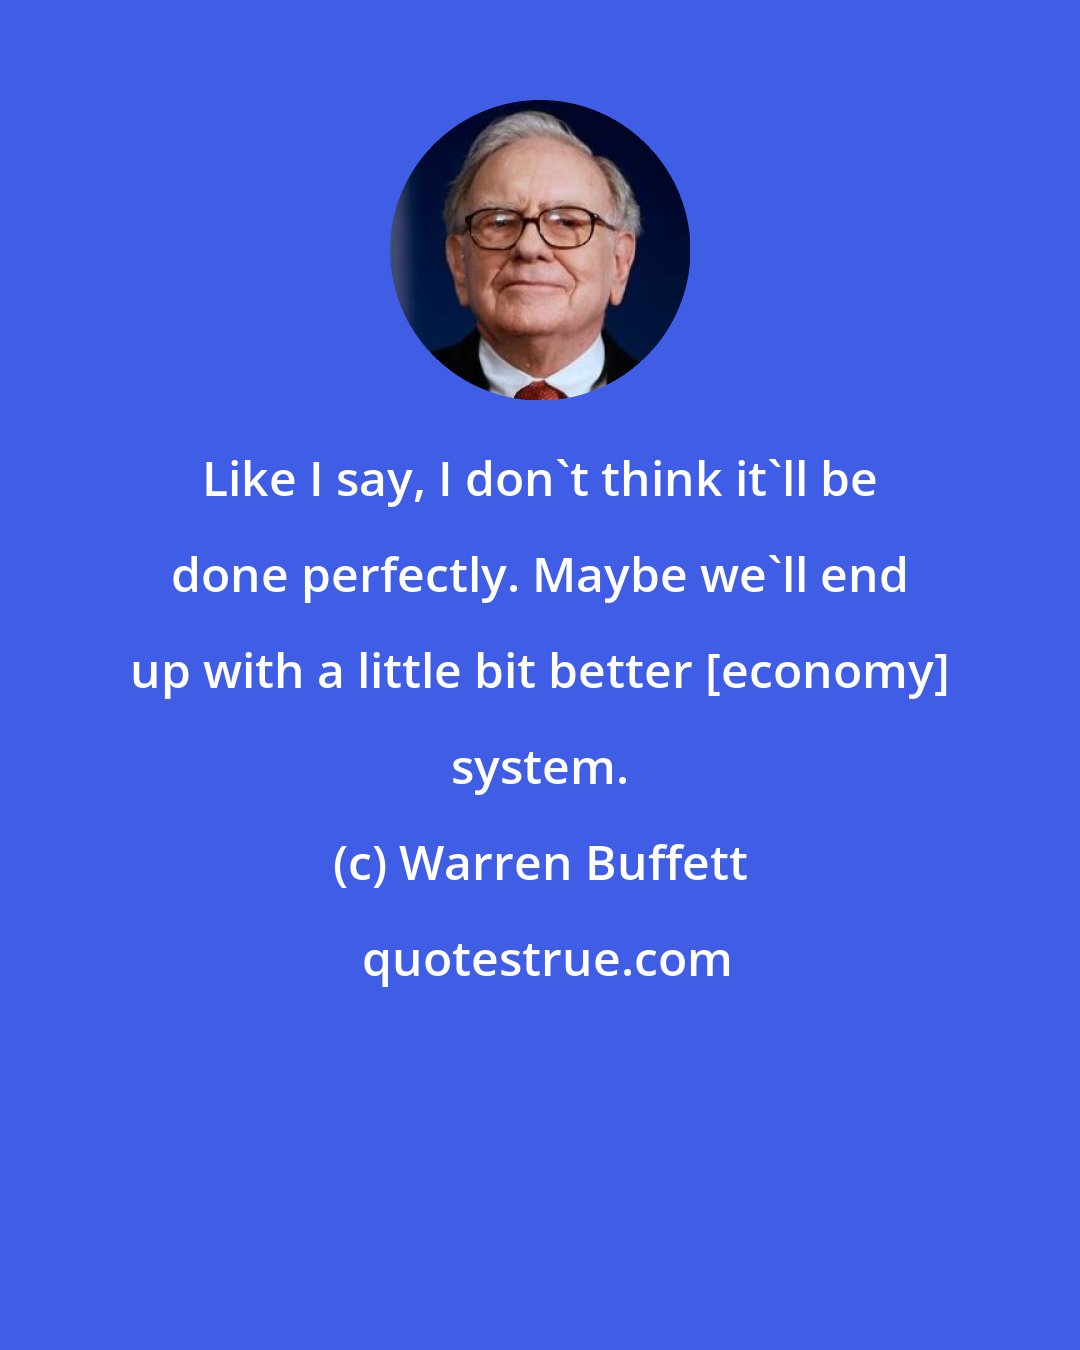 Warren Buffett: Like I say, I don't think it'll be done perfectly. Maybe we'll end up with a little bit better [economy] system.